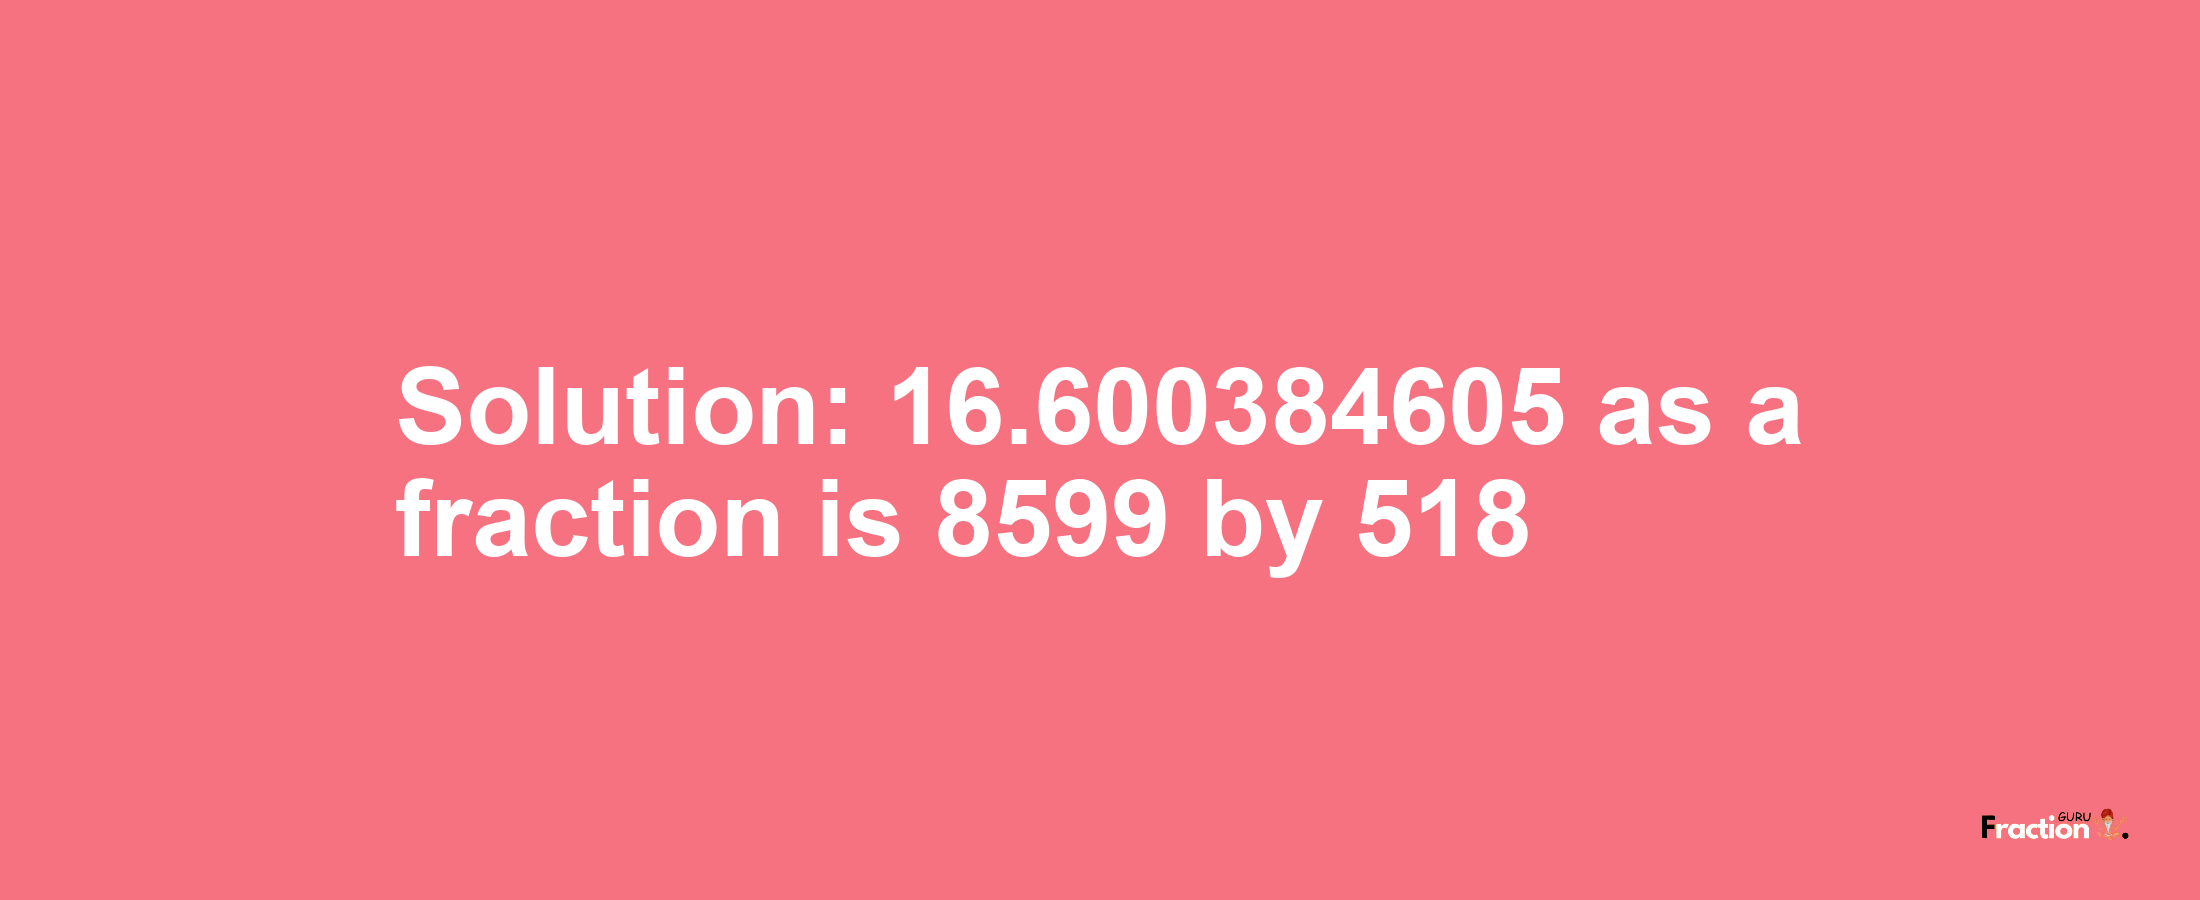 Solution:16.600384605 as a fraction is 8599/518